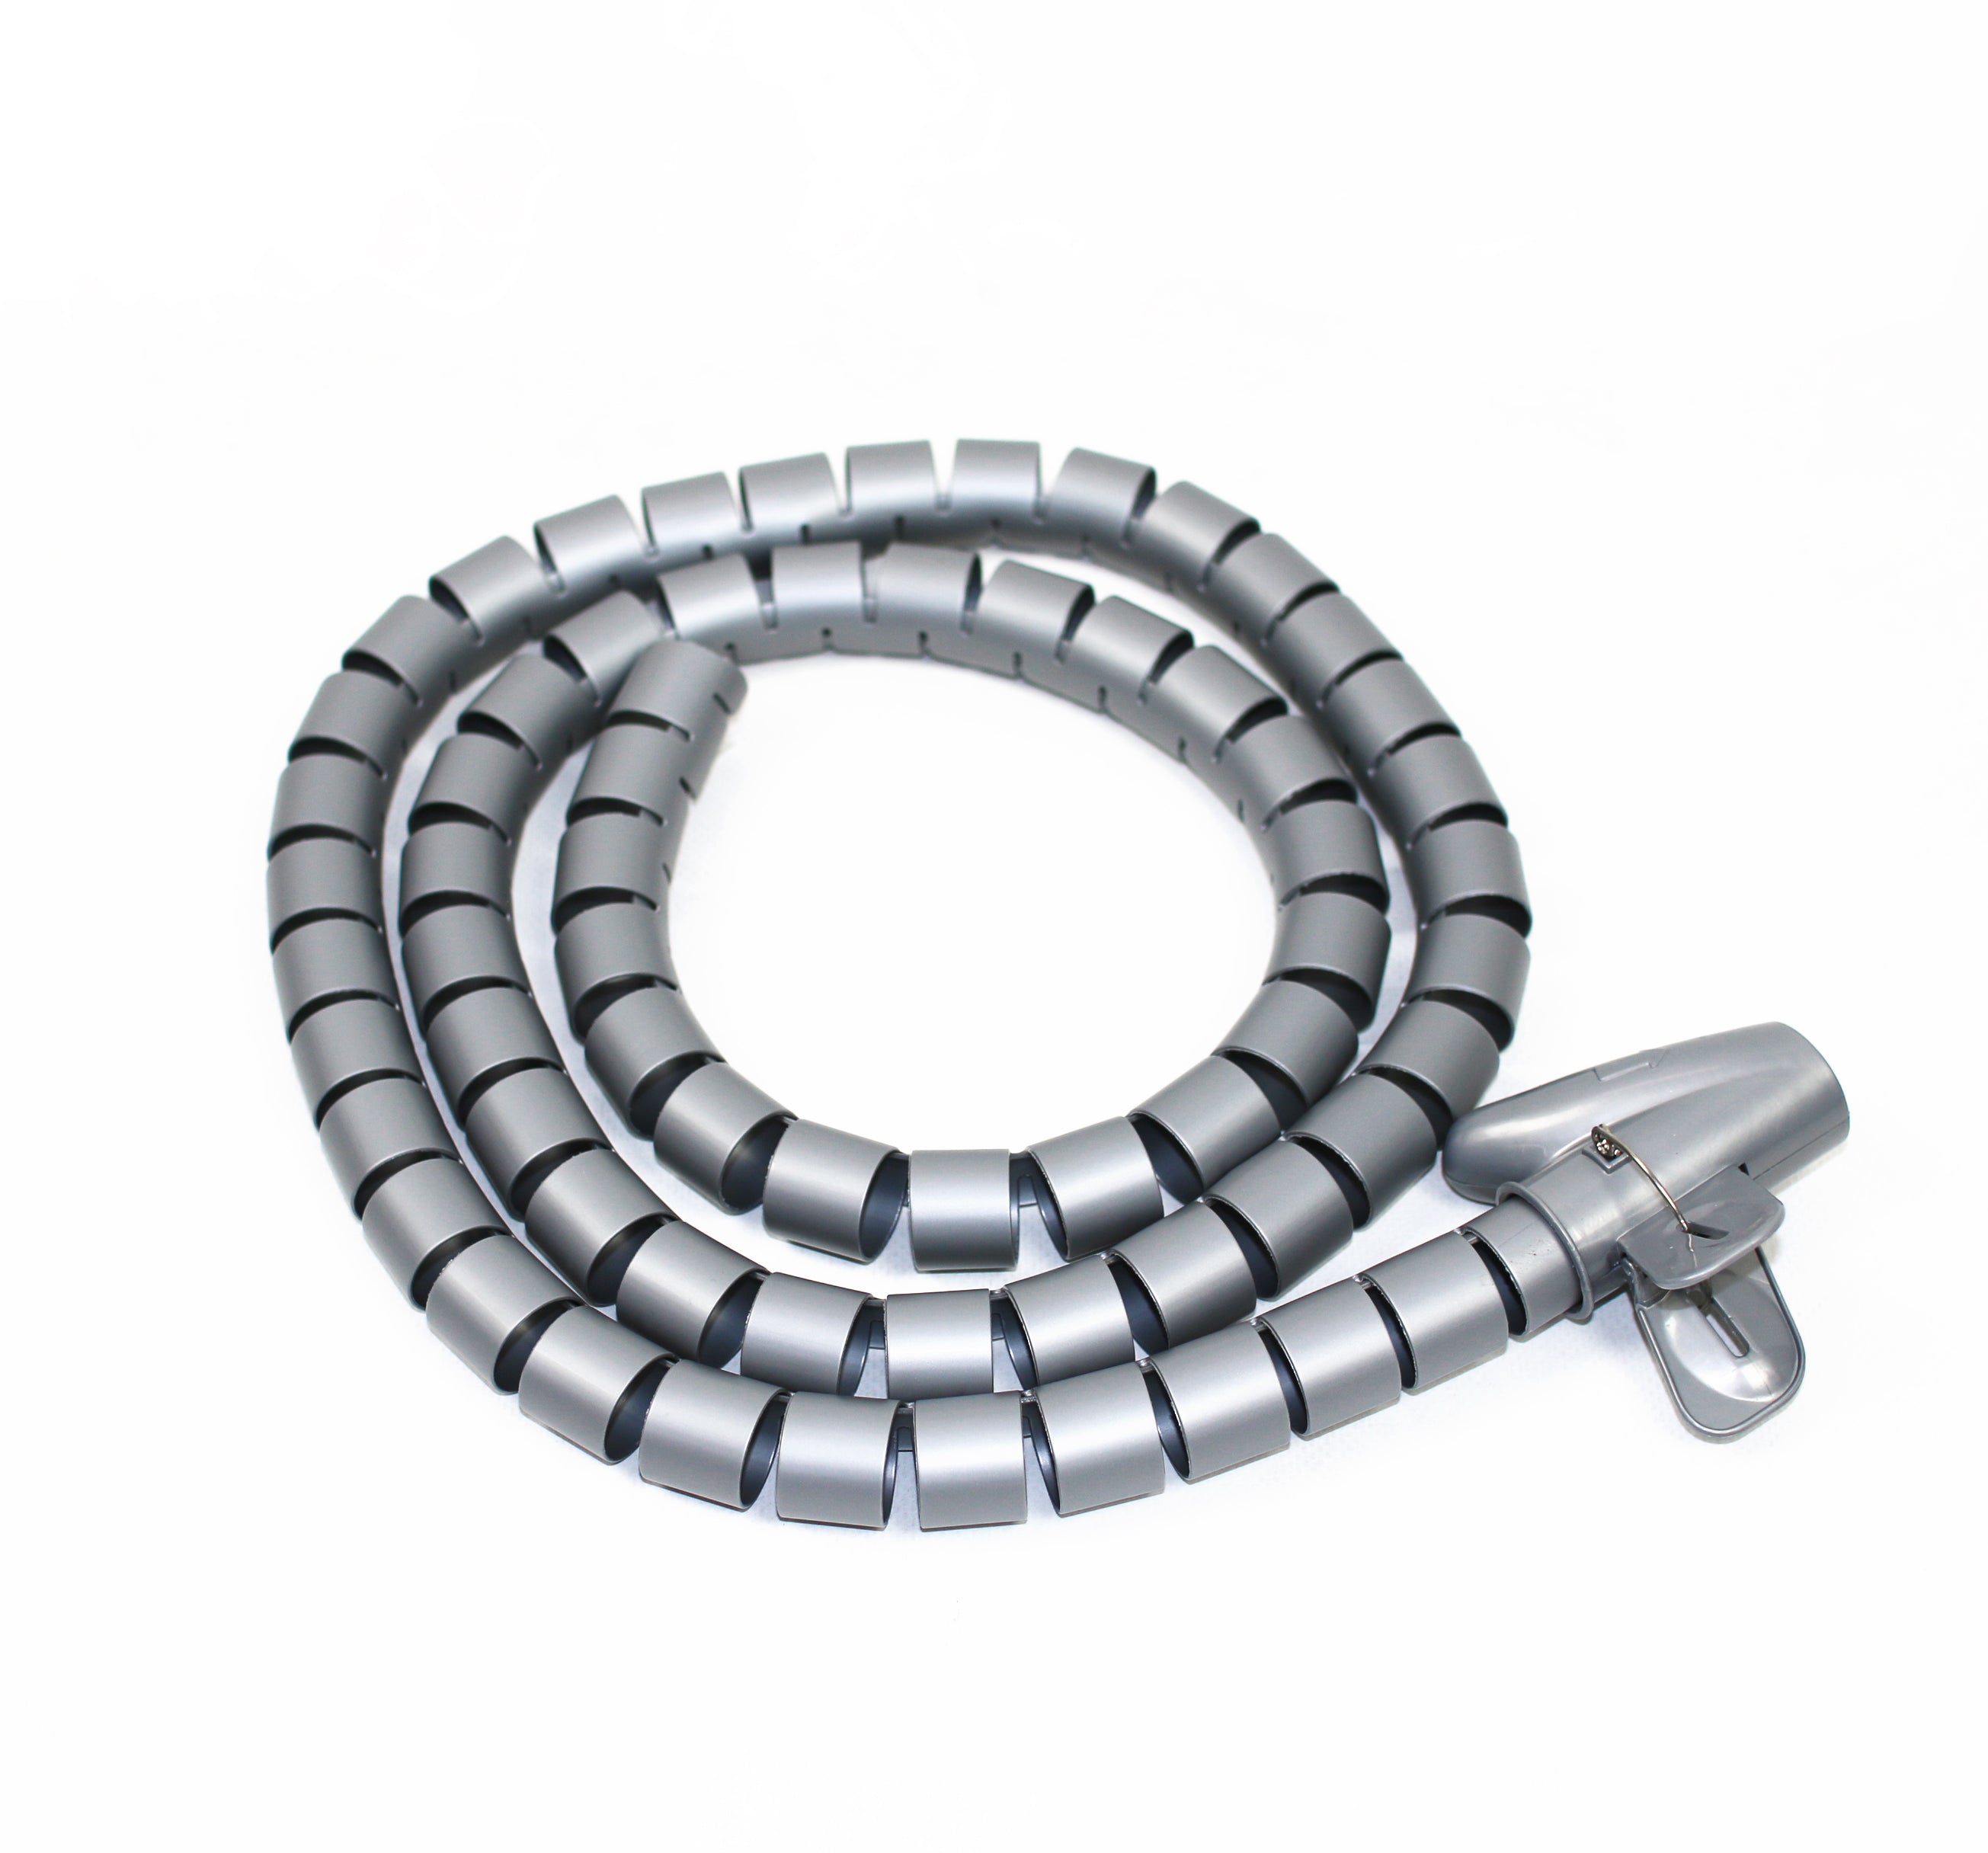 SHHMA Cable Organizer Cable Sleeve The Inner Diameter is 42 Mm, The Length  is 10 Meters, and It is Used in The Office,Gray 並行輸入